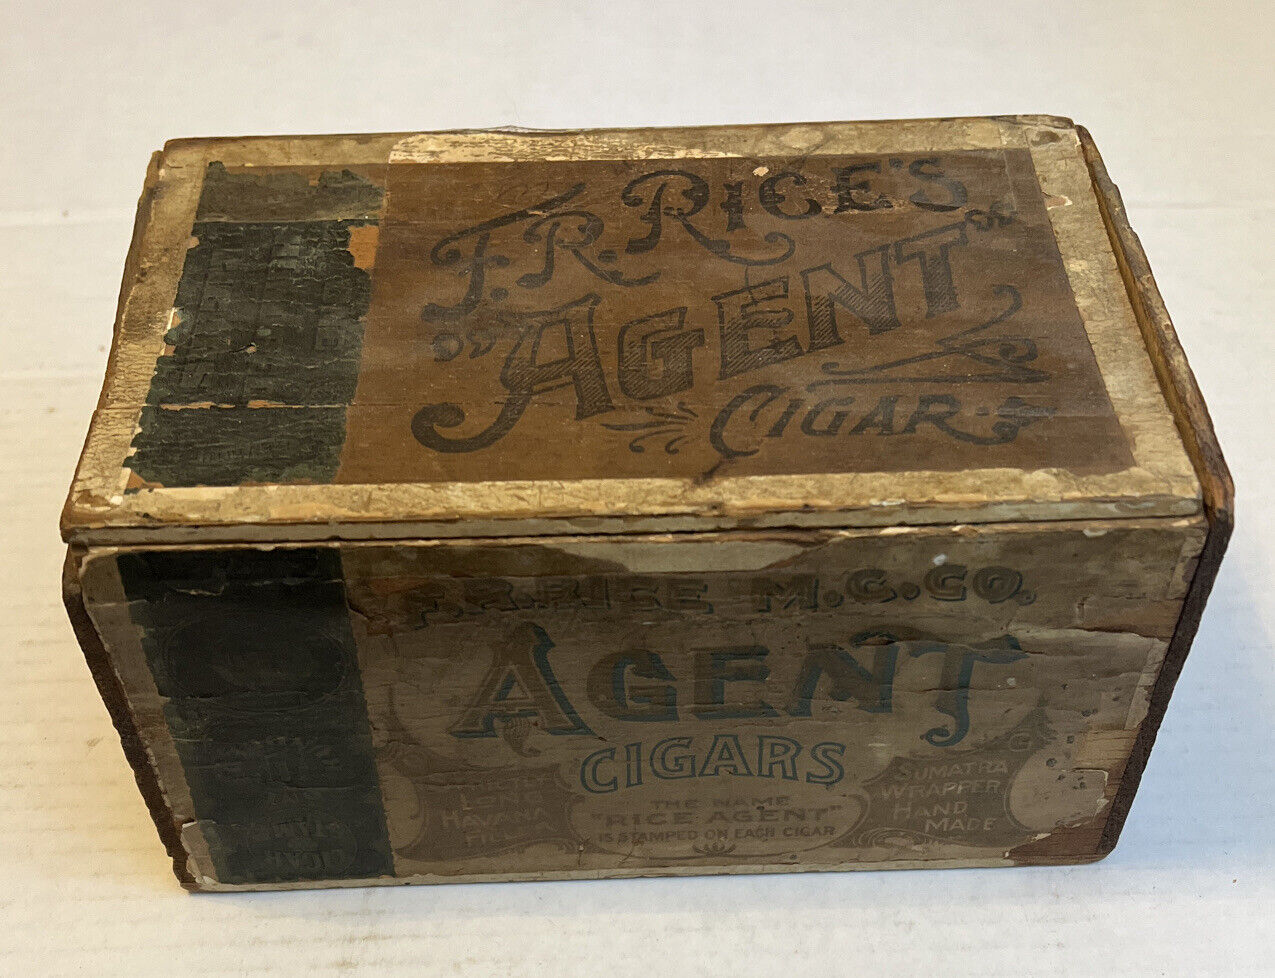 Agent Cigar Box 1901 Tax Stamp F.R. Rice M. Co. St Louis MO. Antique